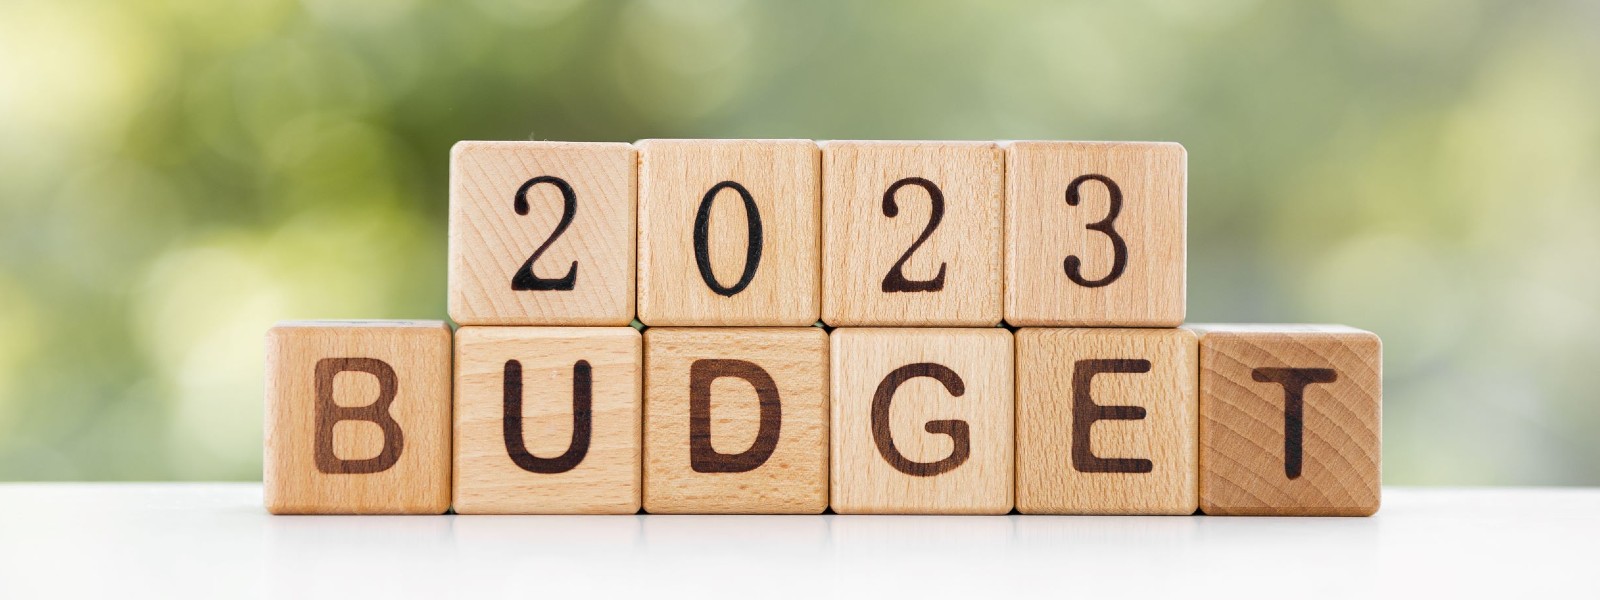 Budget 2023 passed in Parliament by majority vote